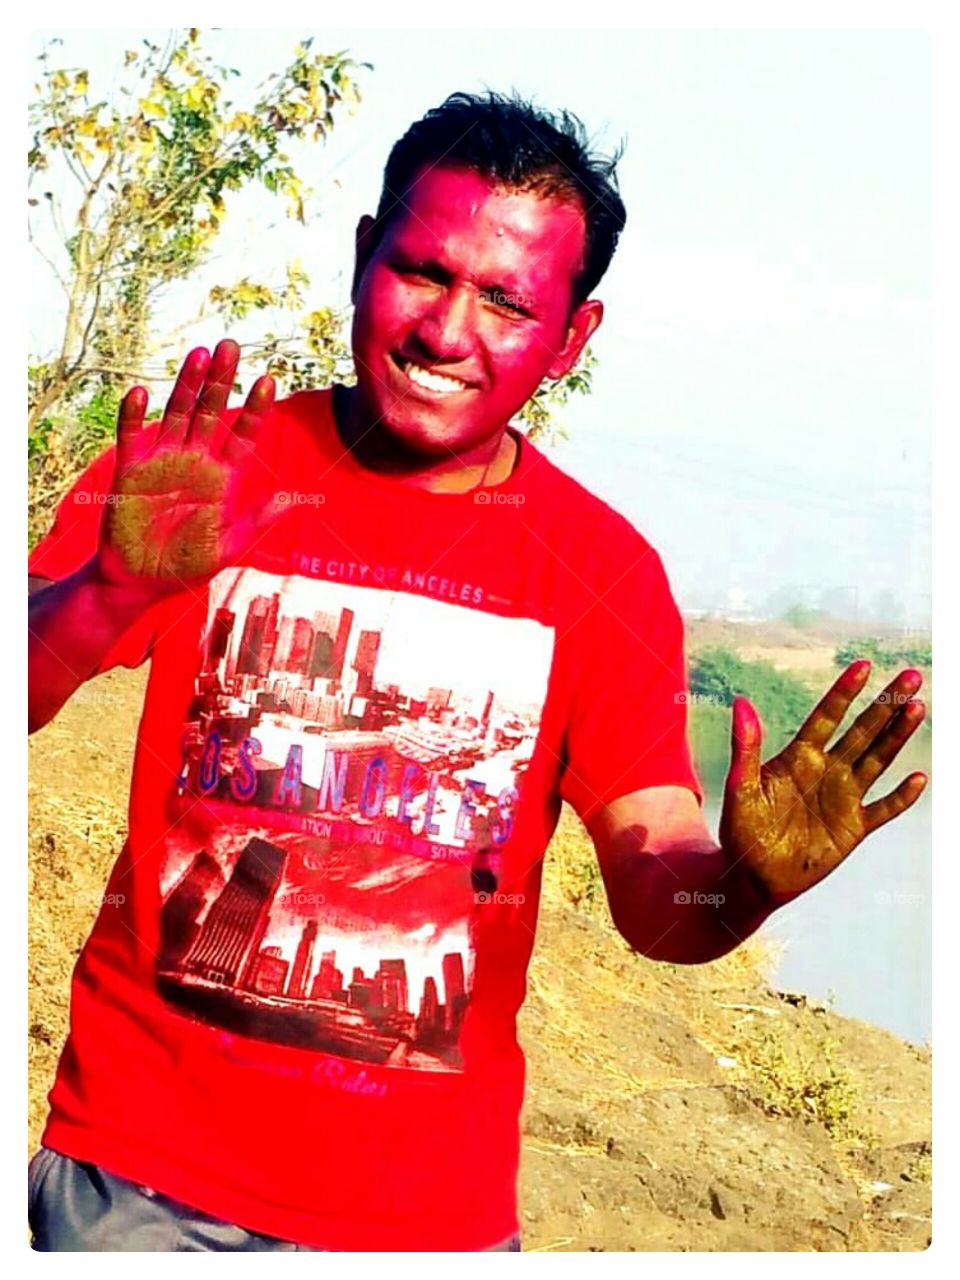 Enjoy Colourfull Holi with friends